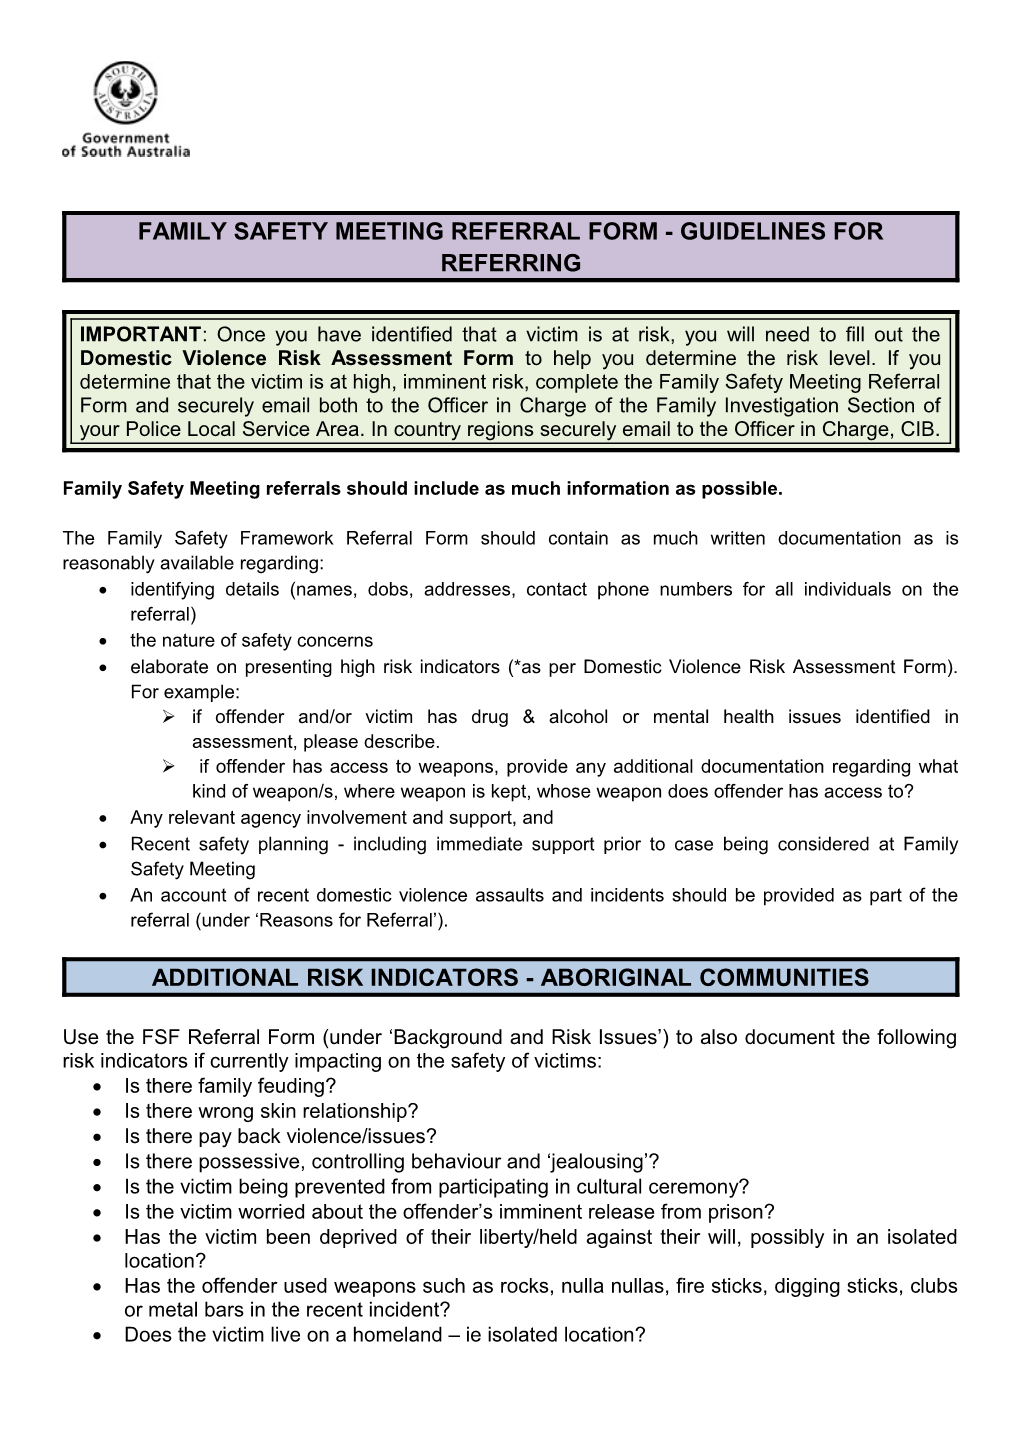 Family Safety Meeting Referral Form - Guidelines for Referring